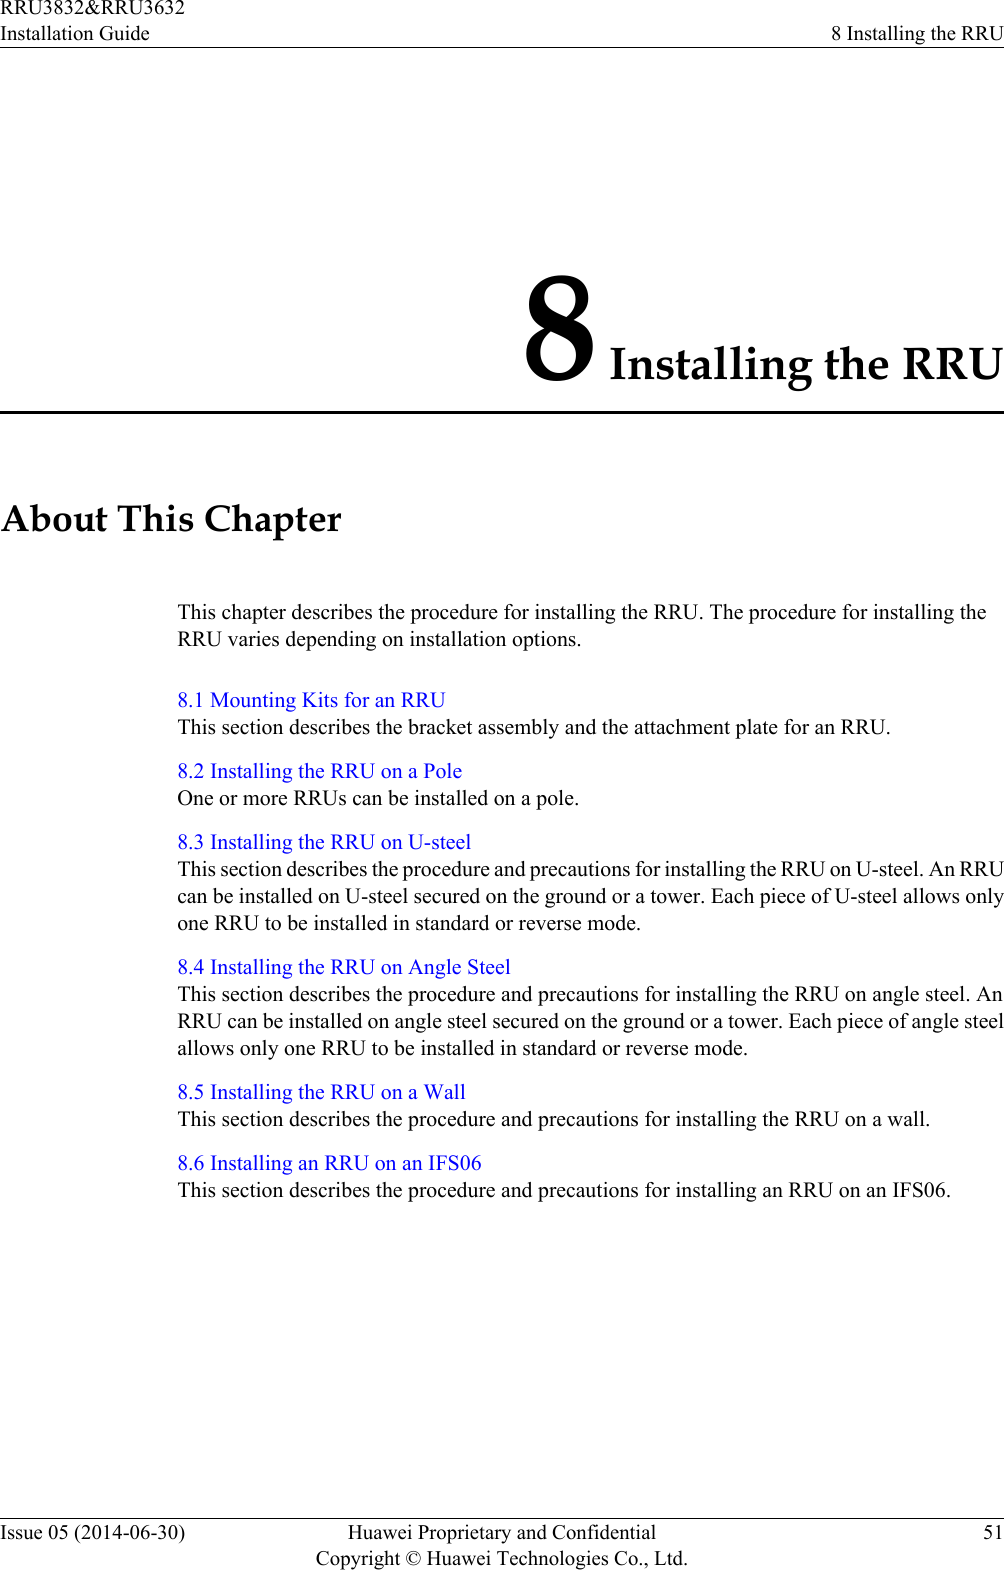 8 Installing the RRUAbout This ChapterThis chapter describes the procedure for installing the RRU. The procedure for installing theRRU varies depending on installation options.8.1 Mounting Kits for an RRUThis section describes the bracket assembly and the attachment plate for an RRU.8.2 Installing the RRU on a PoleOne or more RRUs can be installed on a pole.8.3 Installing the RRU on U-steelThis section describes the procedure and precautions for installing the RRU on U-steel. An RRUcan be installed on U-steel secured on the ground or a tower. Each piece of U-steel allows onlyone RRU to be installed in standard or reverse mode.8.4 Installing the RRU on Angle SteelThis section describes the procedure and precautions for installing the RRU on angle steel. AnRRU can be installed on angle steel secured on the ground or a tower. Each piece of angle steelallows only one RRU to be installed in standard or reverse mode.8.5 Installing the RRU on a WallThis section describes the procedure and precautions for installing the RRU on a wall.8.6 Installing an RRU on an IFS06This section describes the procedure and precautions for installing an RRU on an IFS06.RRU3832&amp;RRU3632Installation Guide 8 Installing the RRUIssue 05 (2014-06-30) Huawei Proprietary and ConfidentialCopyright © Huawei Technologies Co., Ltd.51